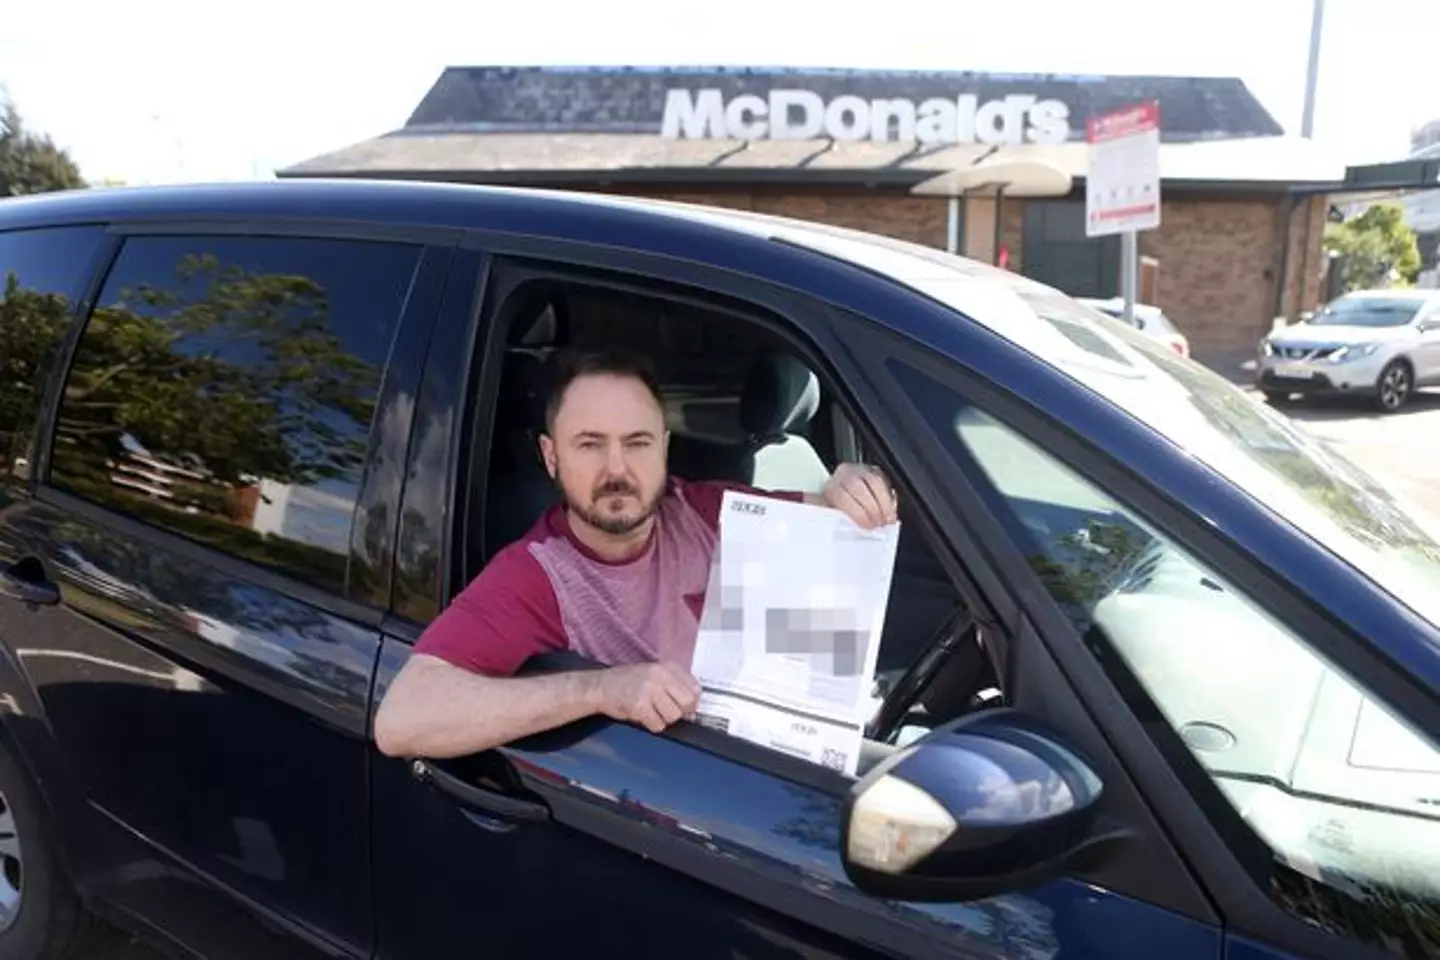 Spencer Barclay outside the McDonald's he was fined at.